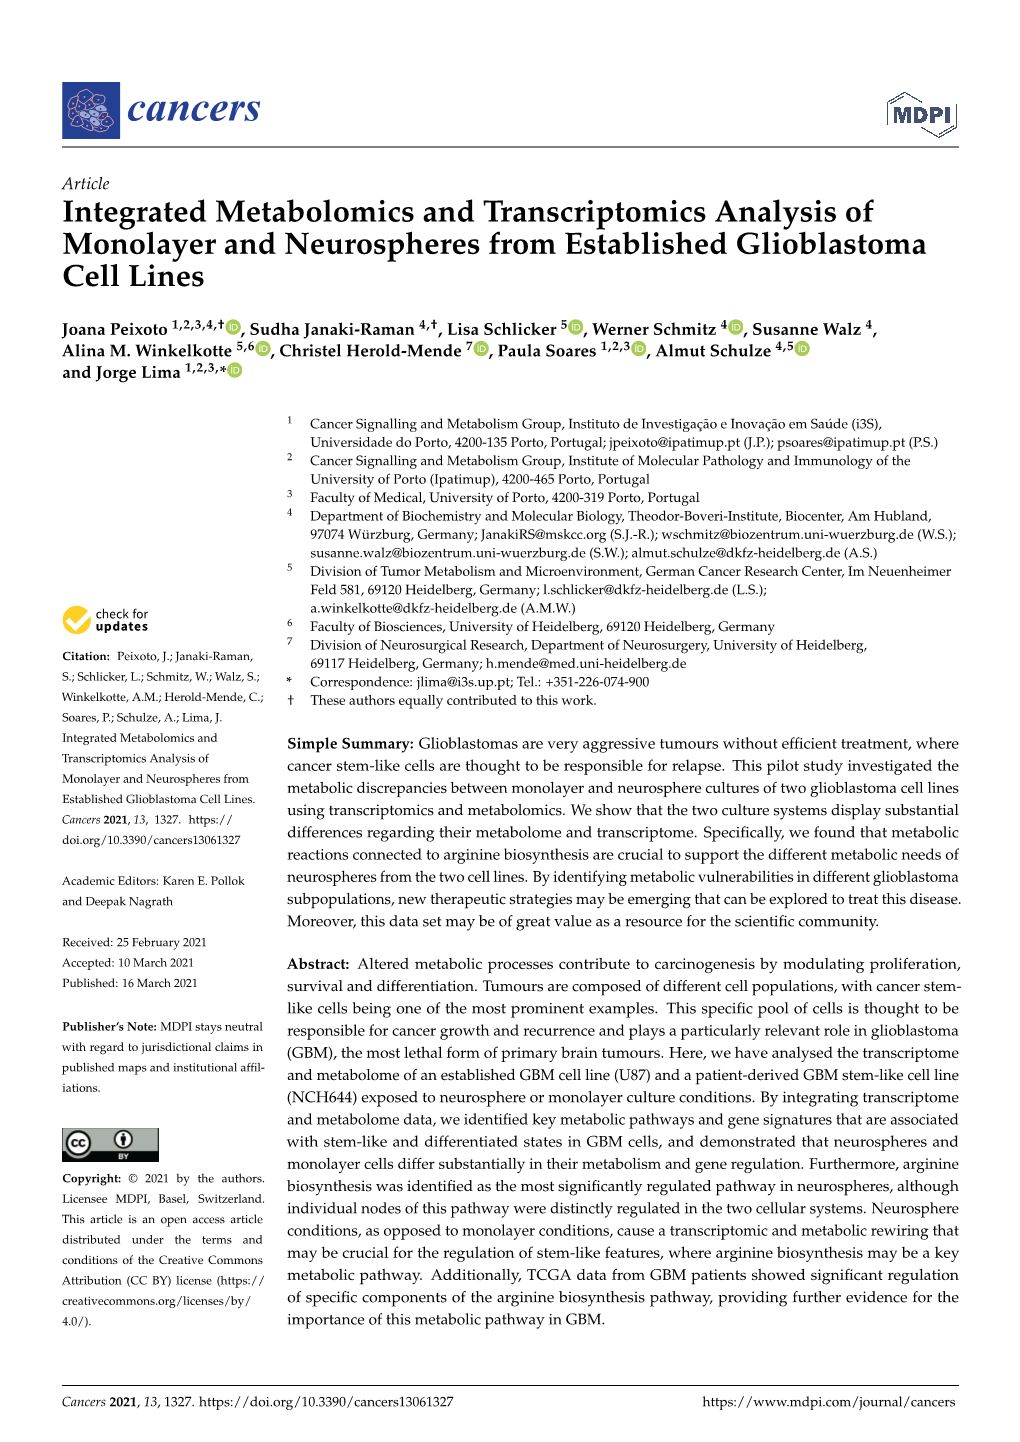 Integrated Metabolomics and Transcriptomics Analysis of Monolayer and Neurospheres from Established Glioblastoma Cell Lines